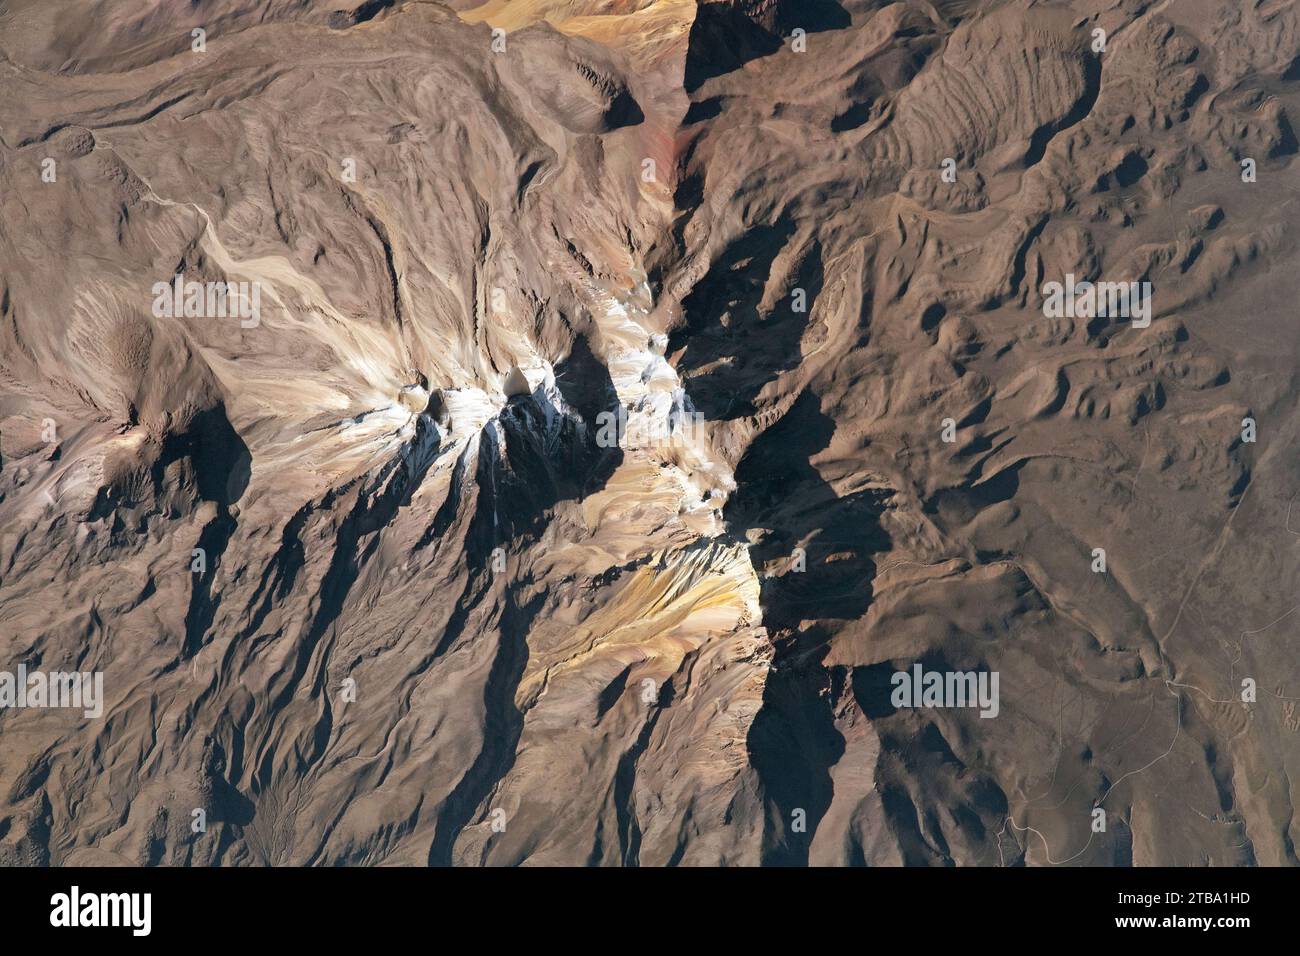 View from space showing part of the Chachani volcanic group in the Andes Mountains. Stock Photo